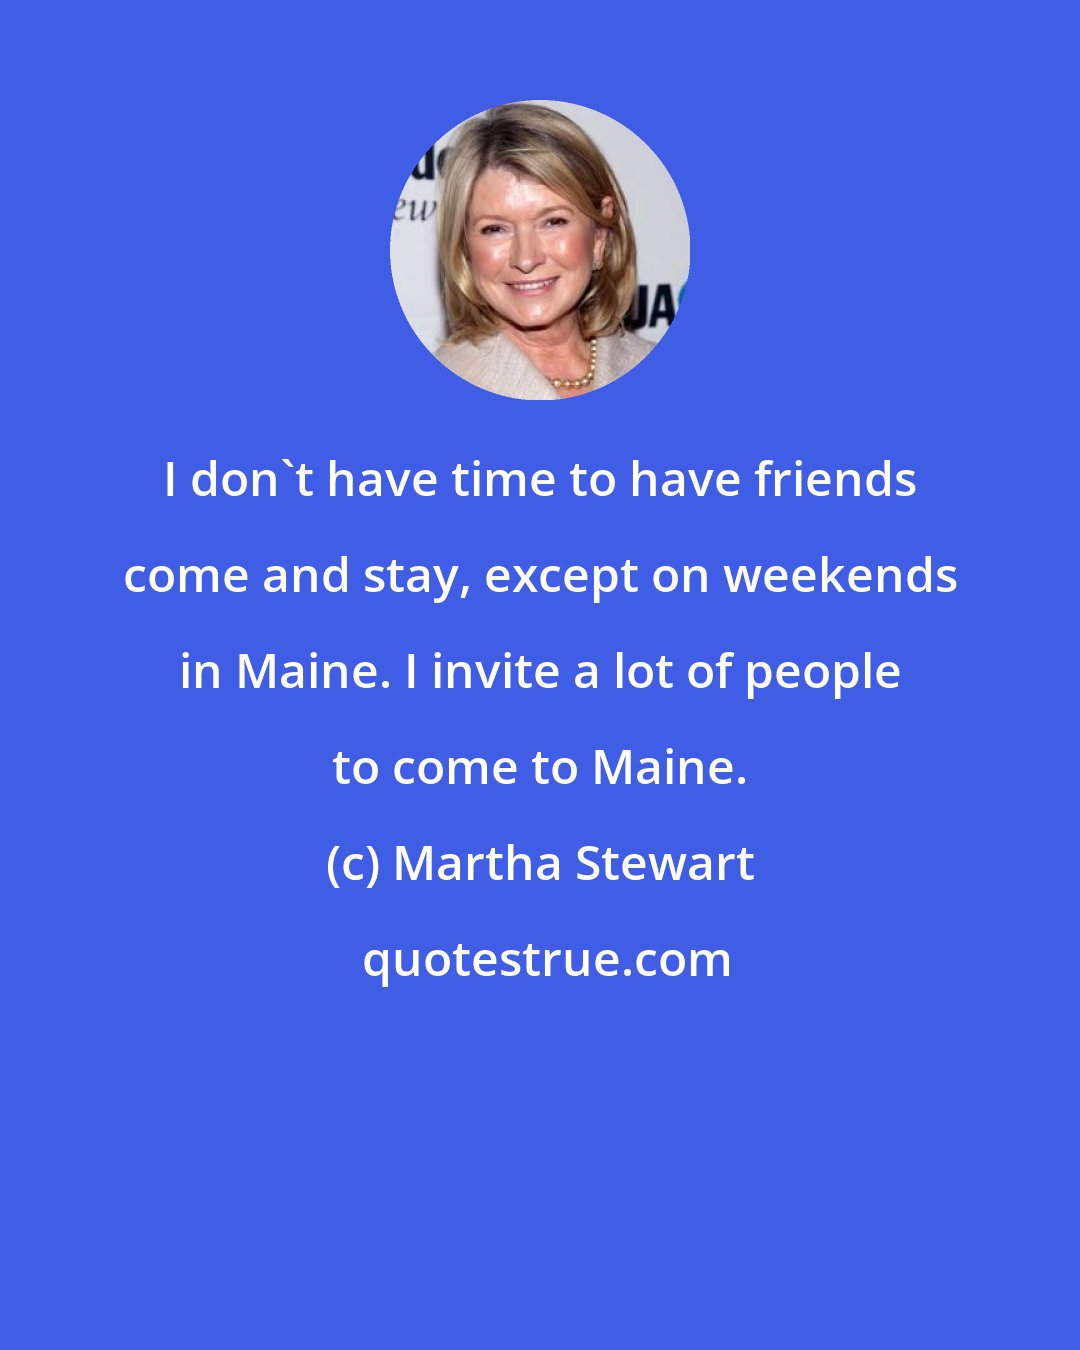 Martha Stewart: I don't have time to have friends come and stay, except on weekends in Maine. I invite a lot of people to come to Maine.